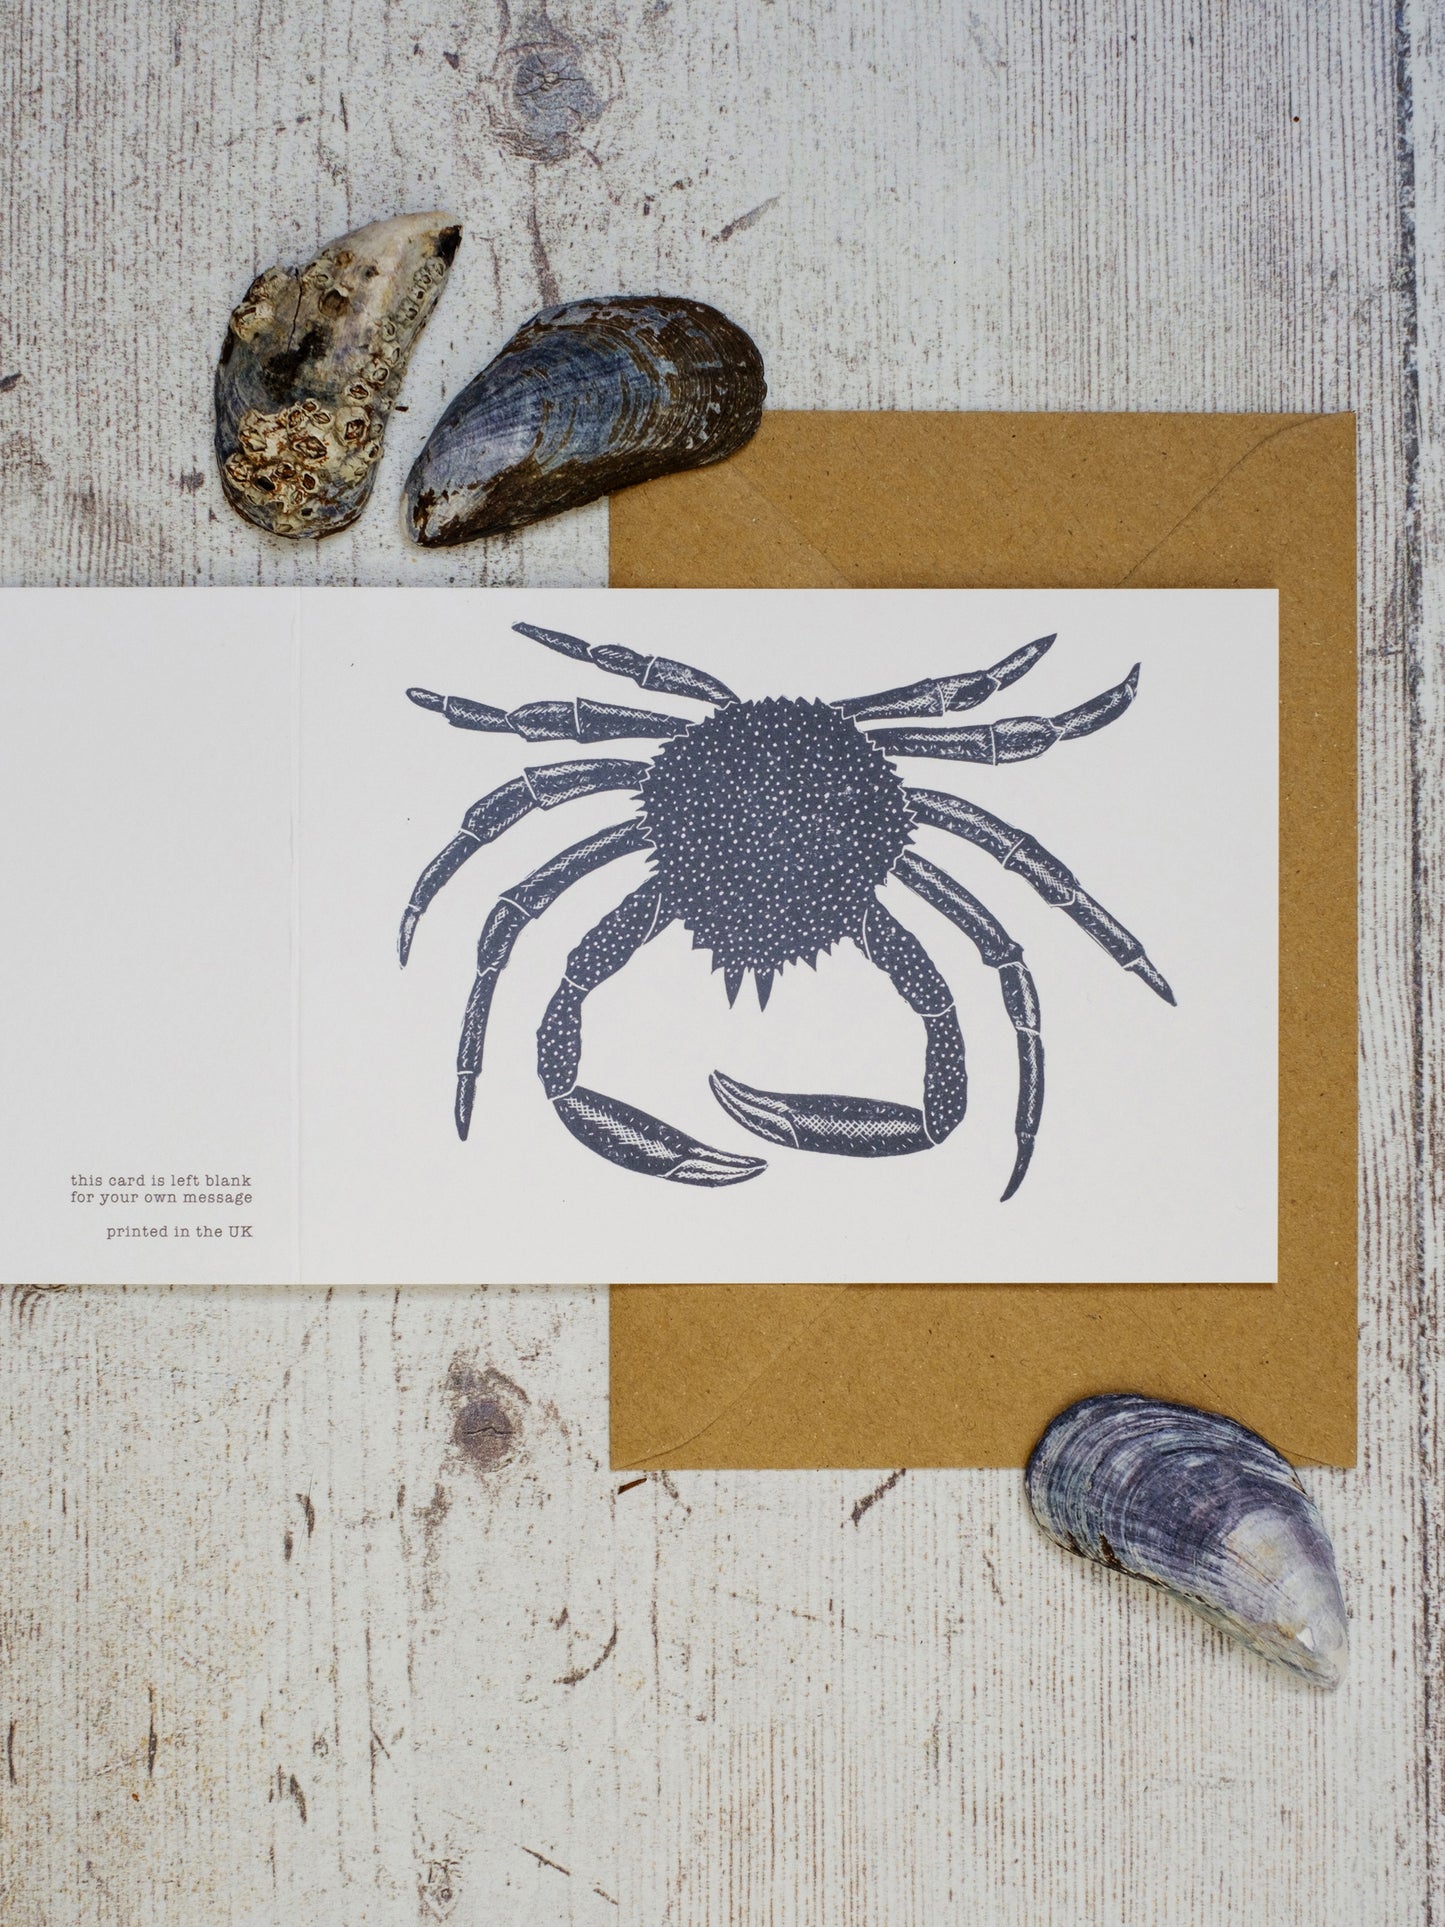 Spider Crab A6 Greeting Card